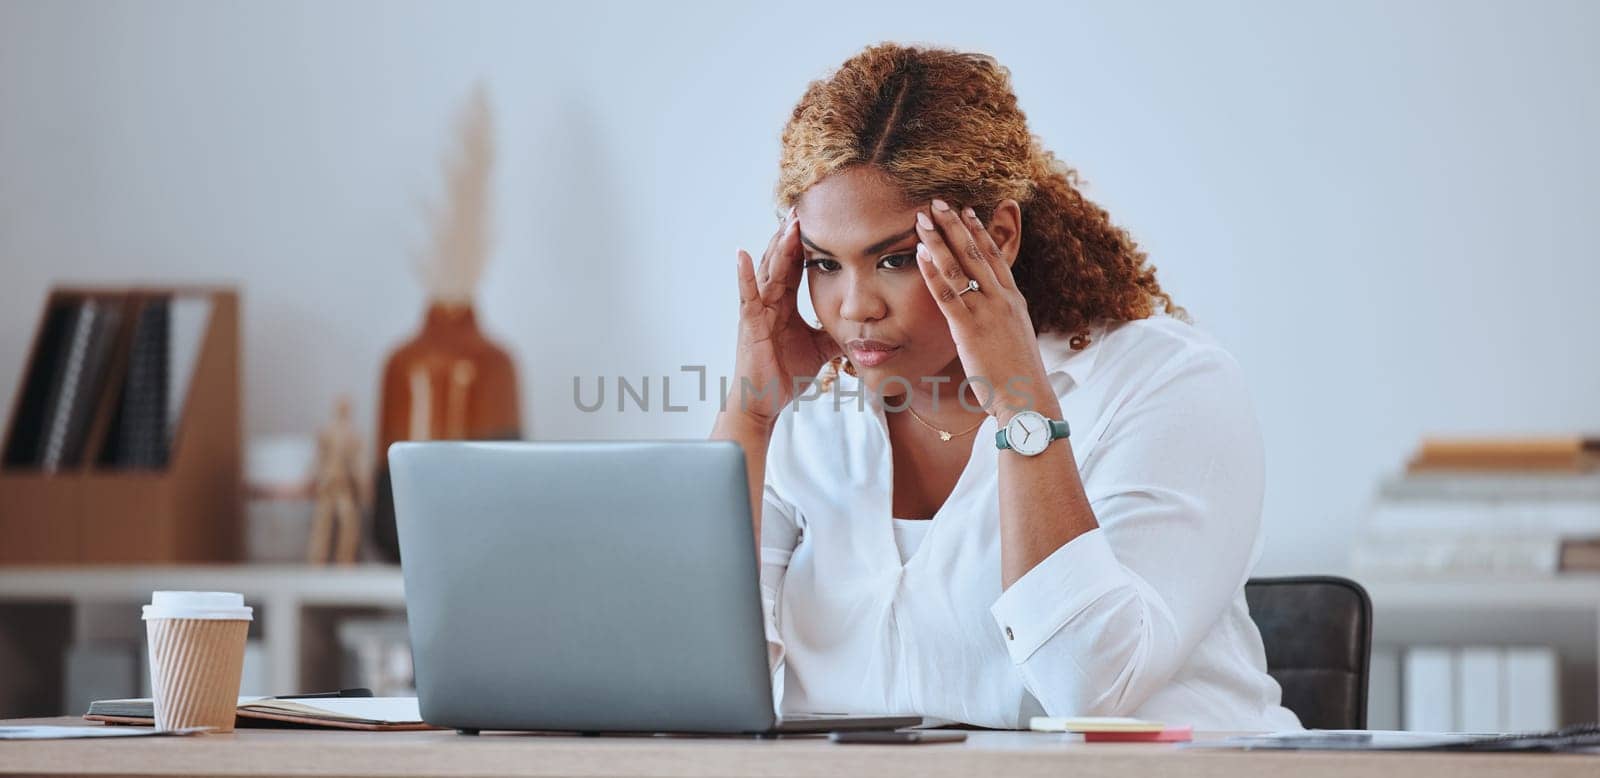 Stress, angry and woman with a startup fail, headache and sad in a company office desk working on a laptop. Frustrated, burnout and young entrepreneur thinking of a risk or problem, tired and mistake.